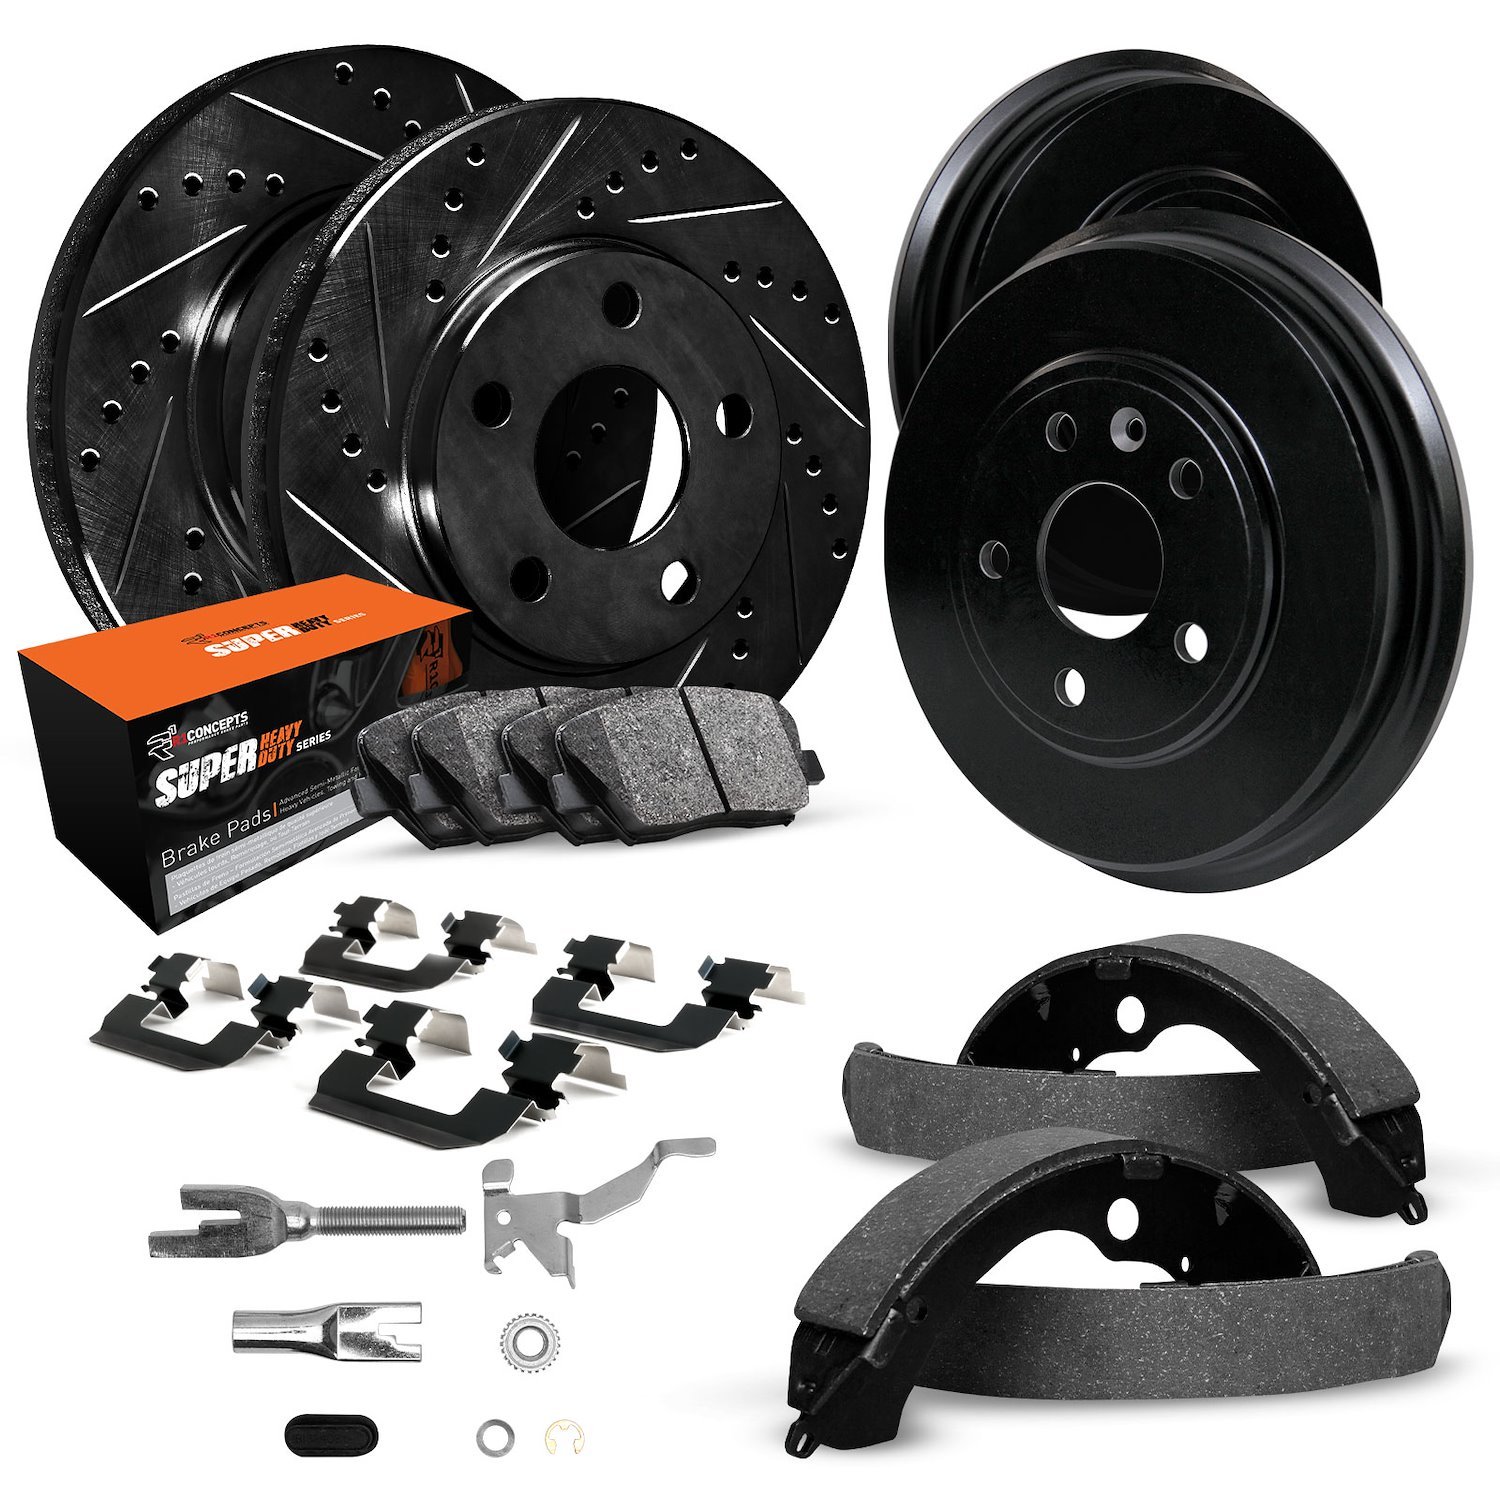 E-Line Drilled/Slotted Black Rotor & Drum Set w/Super-Duty Pads, Shoes, Hardware/Adjusters, 1988-2000 GM